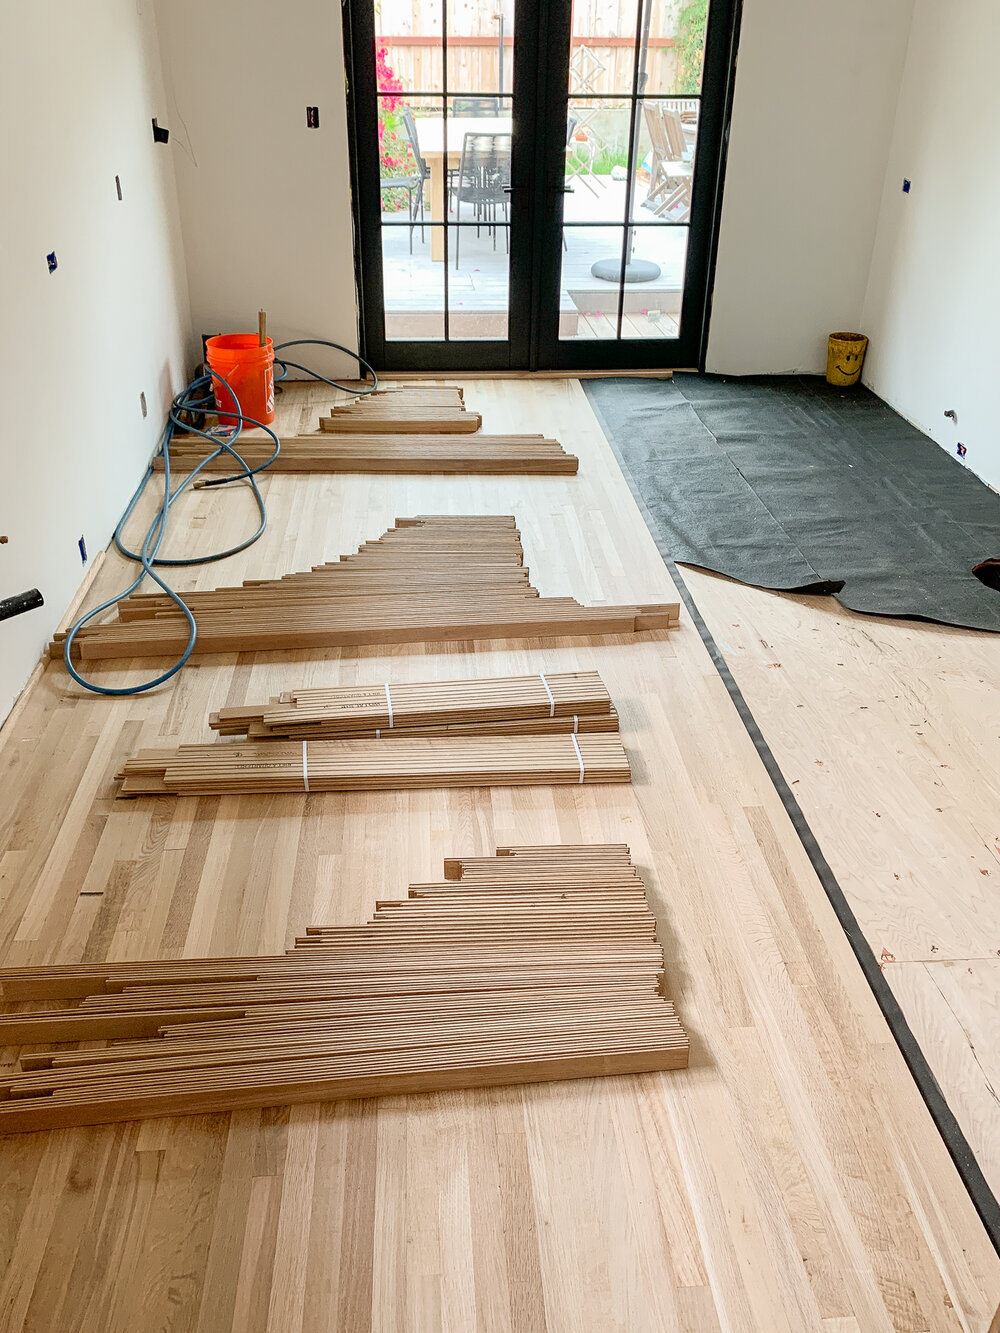 Installing New Hardwood Floors In Our, Installing Hardwood Floors In Existing Kitchen